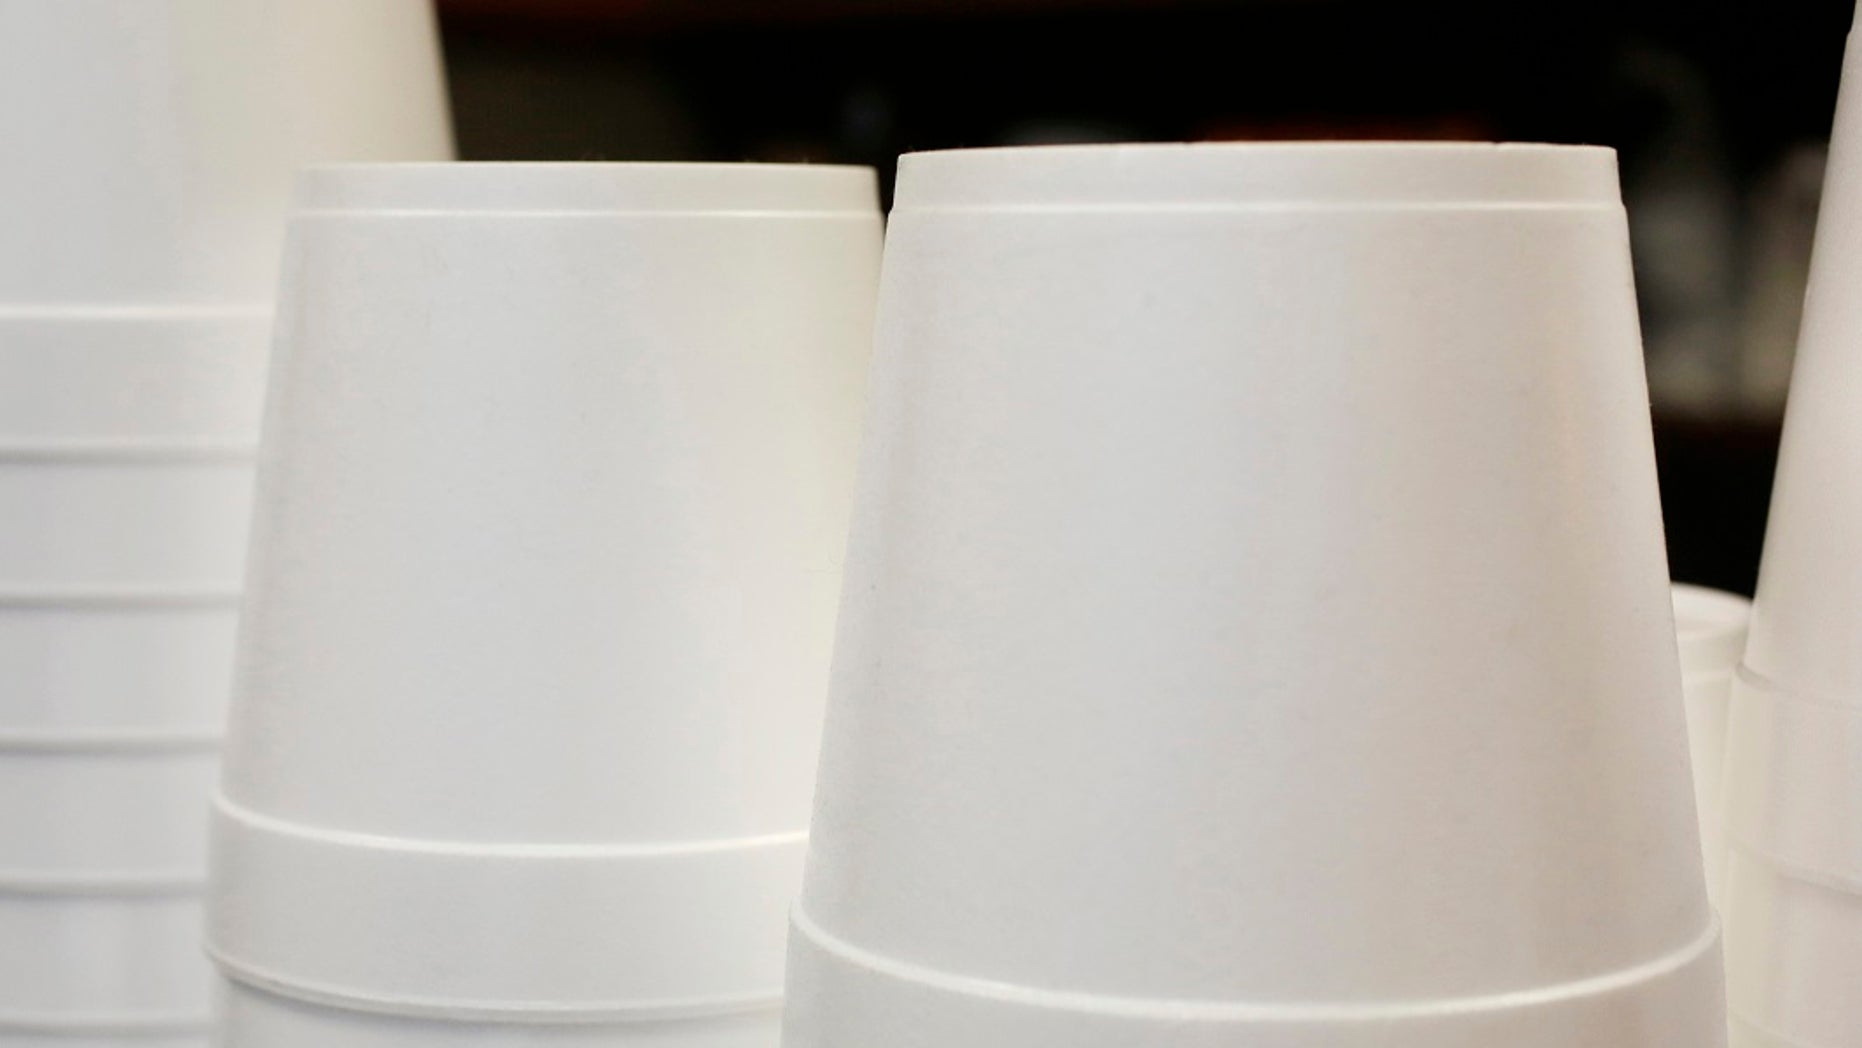 New York City bans foam containers, coffee cups and more in landmark legislation